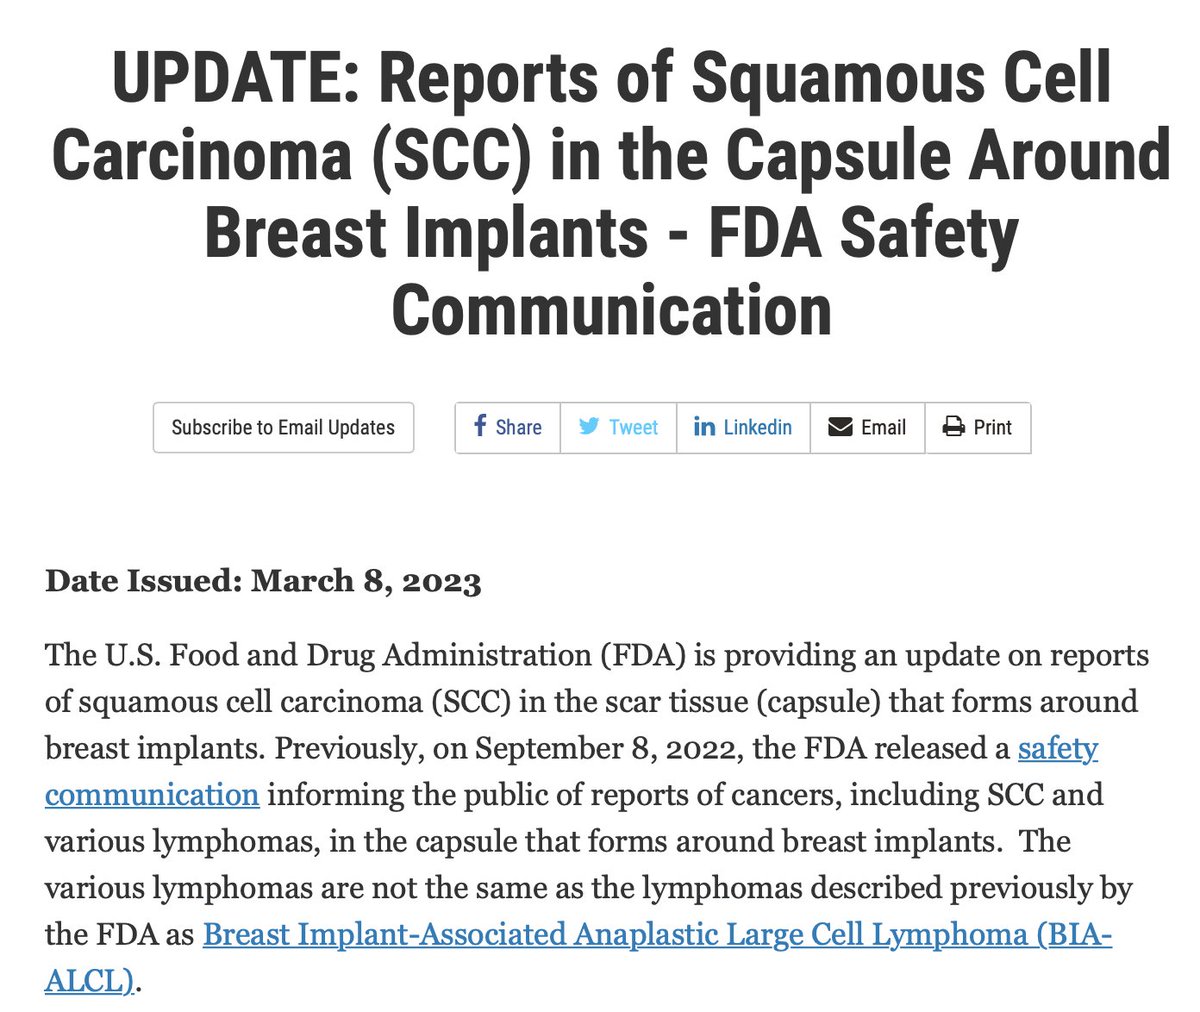 Today, @US_FDA #breastimplant #safetyadvisory on #squamouscell carcinoma (SCC) around breast implants. Encourages reporting to FDA and the 
@ASPS_News
 #PROFILE Registry. #oncsurgery #endcancer

FDA Update: fda.gov/medical-device…

@MDAndersonNews review: authors.elsevier.com/a/1gdavLPnEccW6